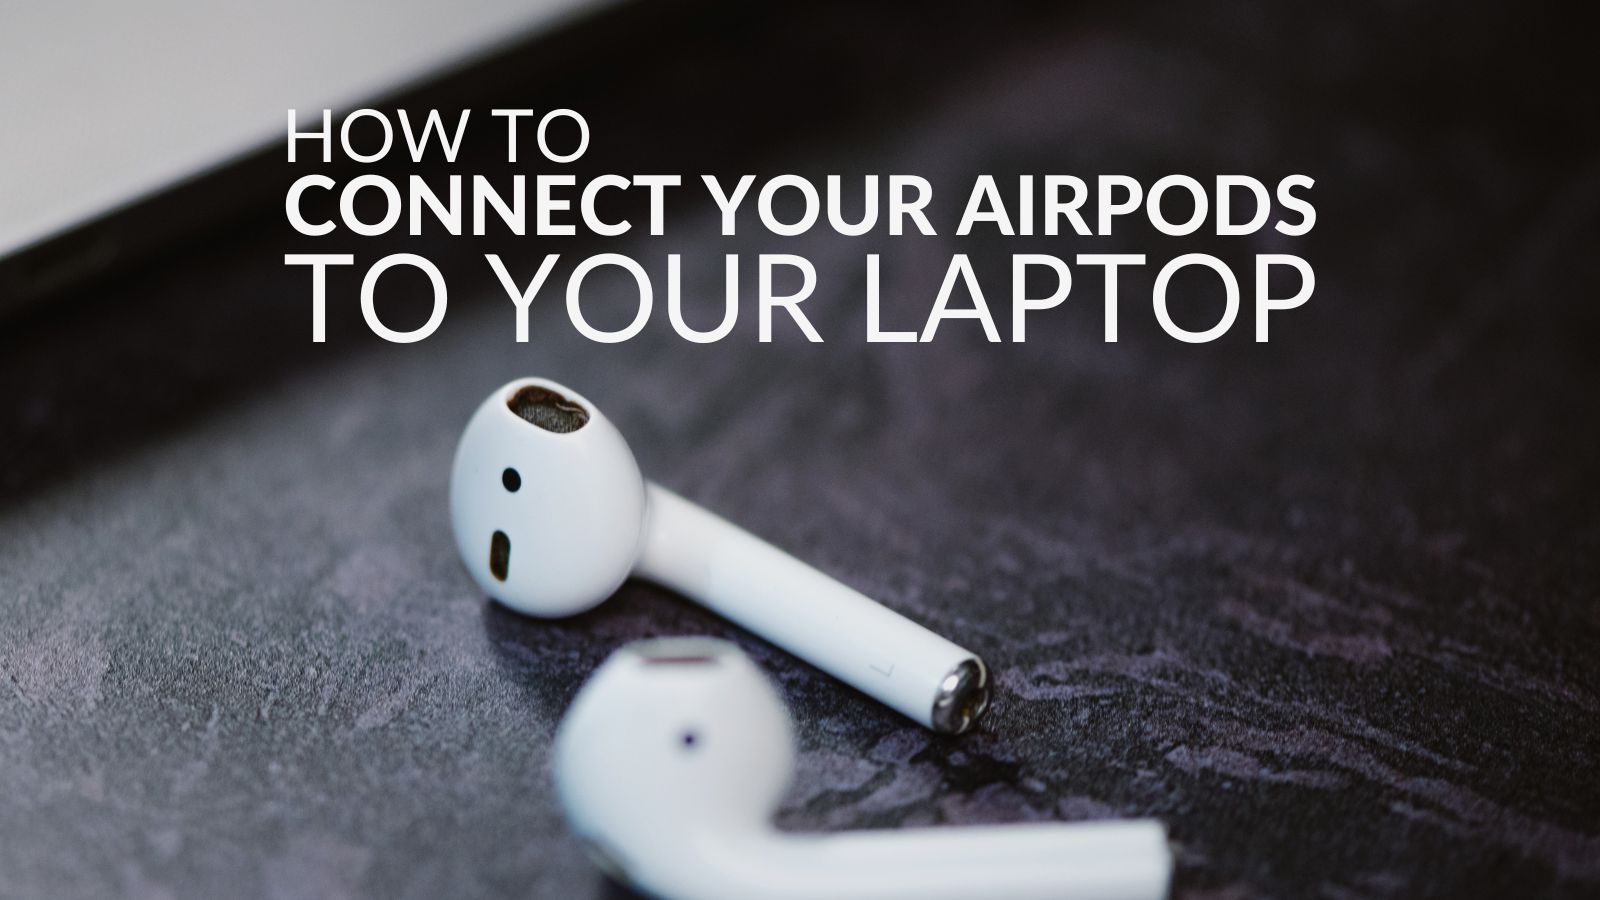 How to Connect your Airpods to your Laptop